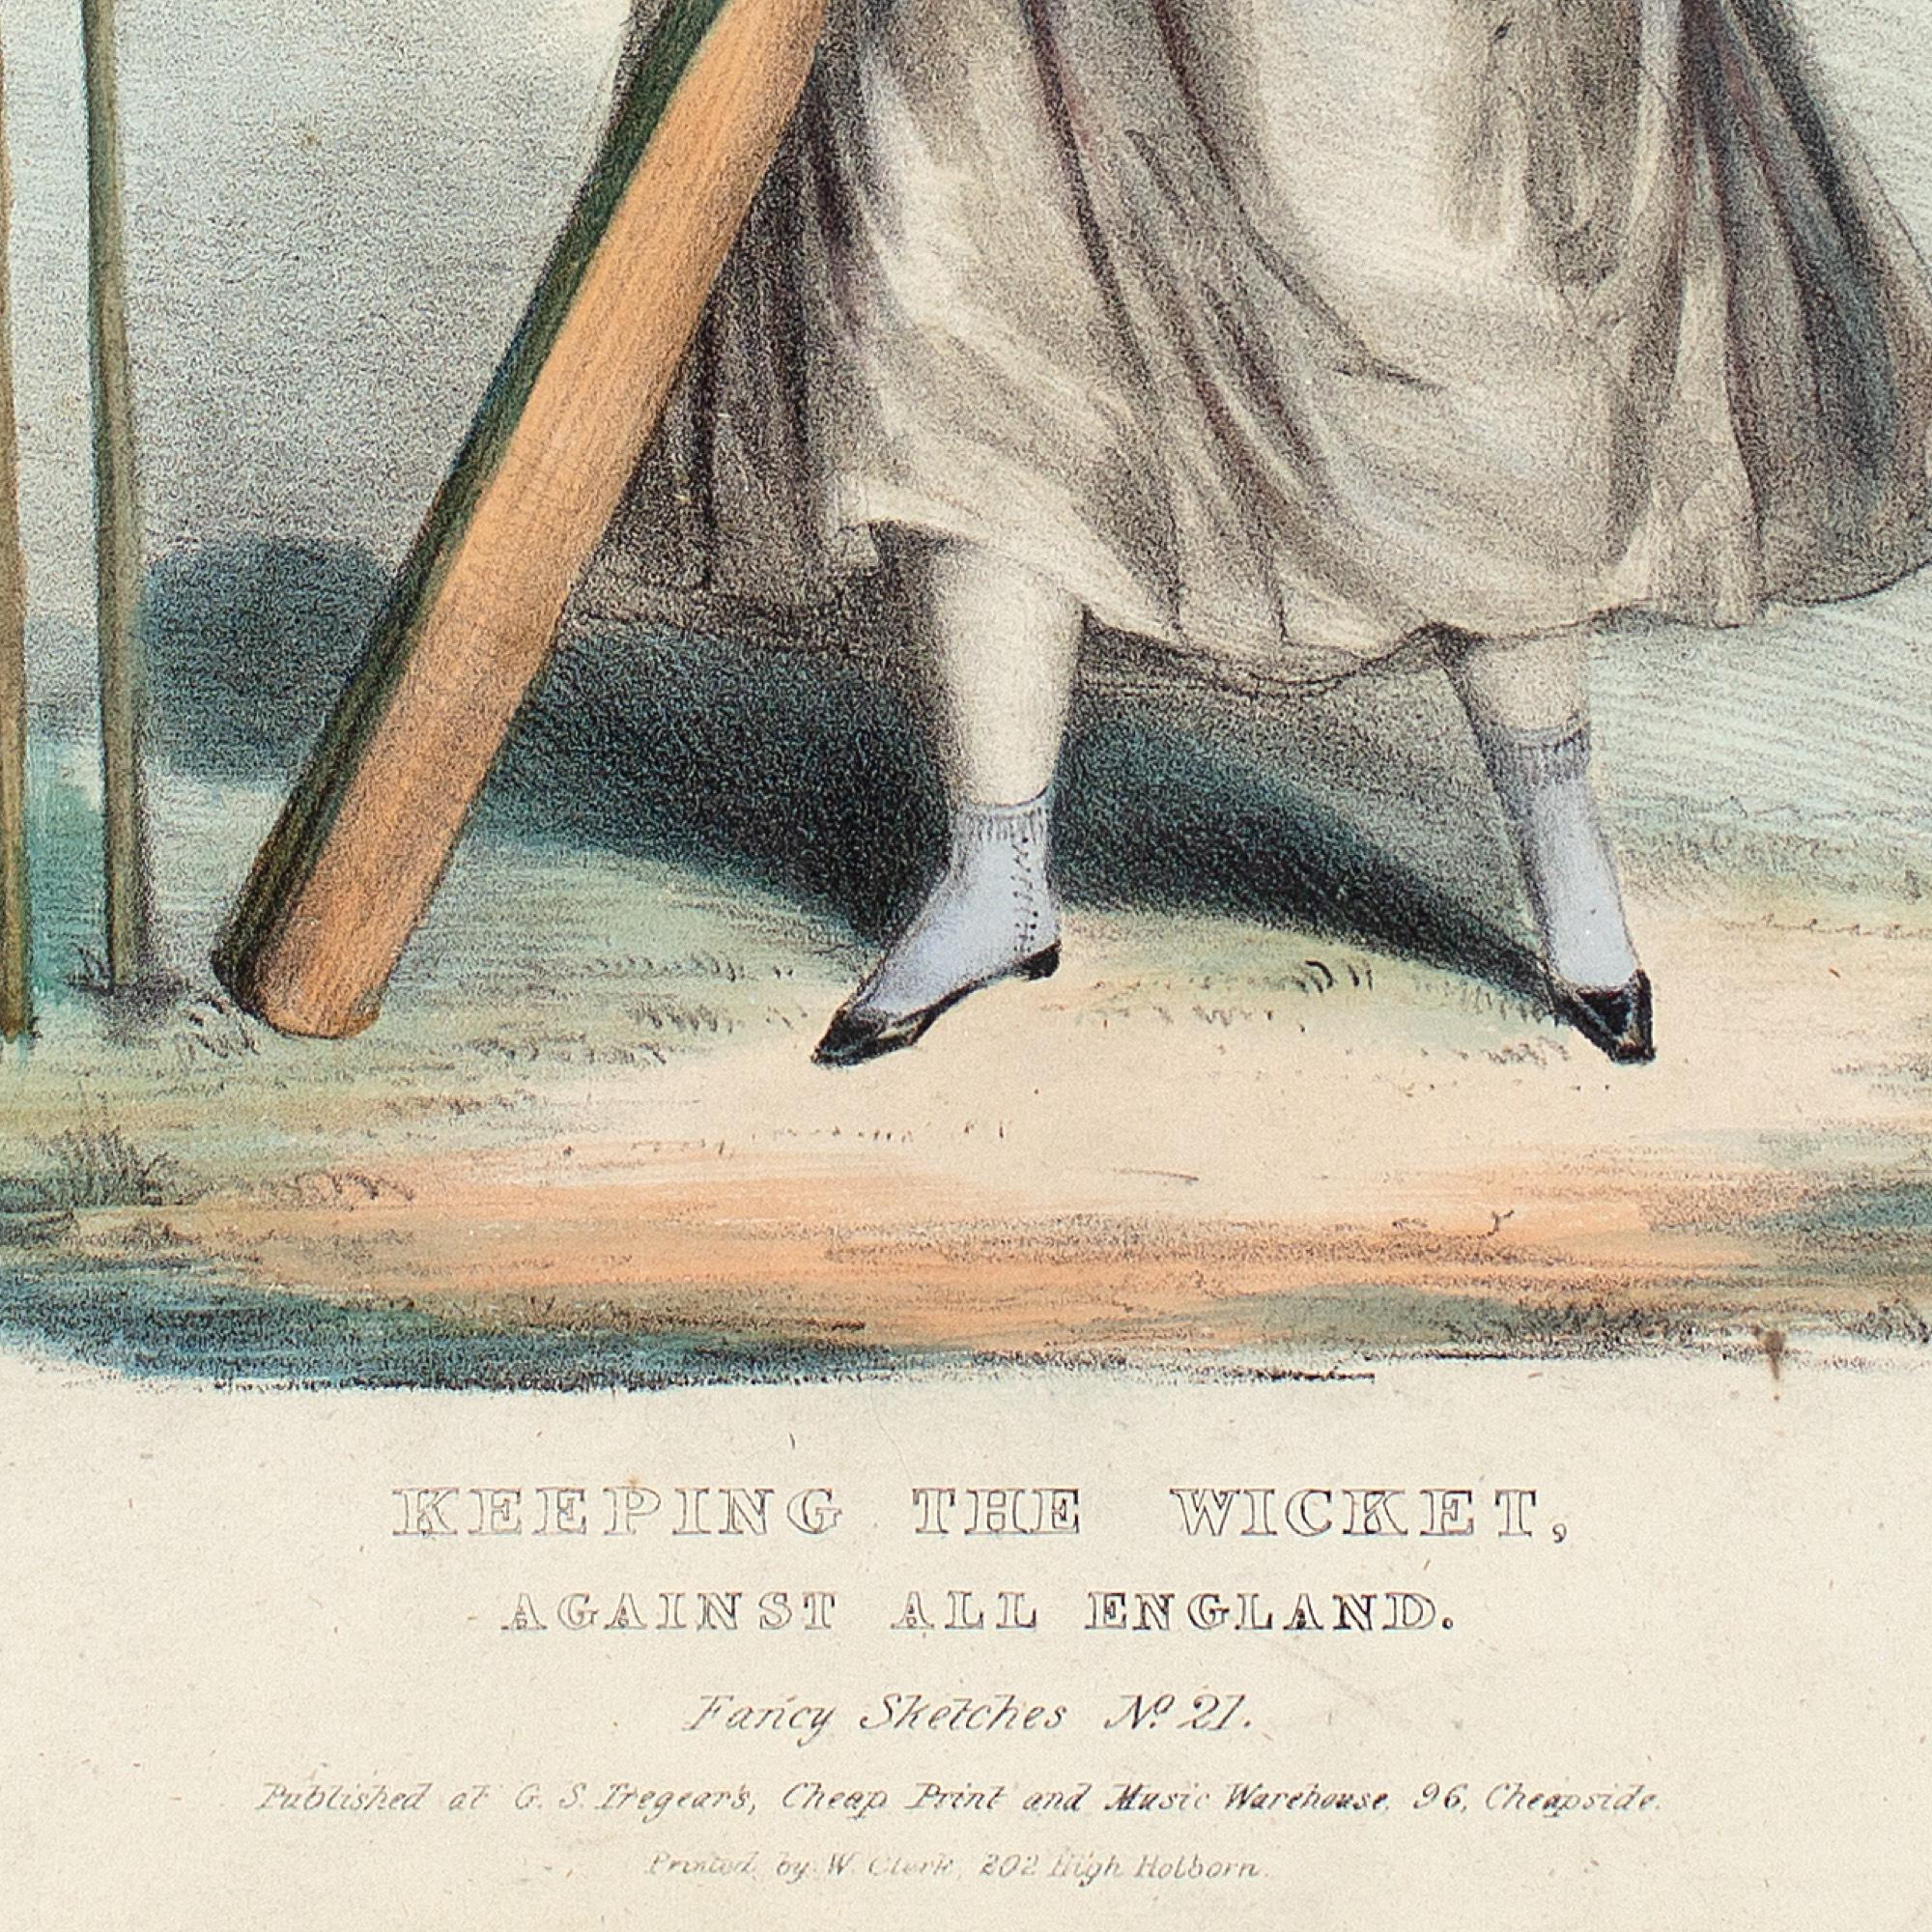 19th-Century Hand-Coloured Lithograph, Keeping The Wicket Against All England 4